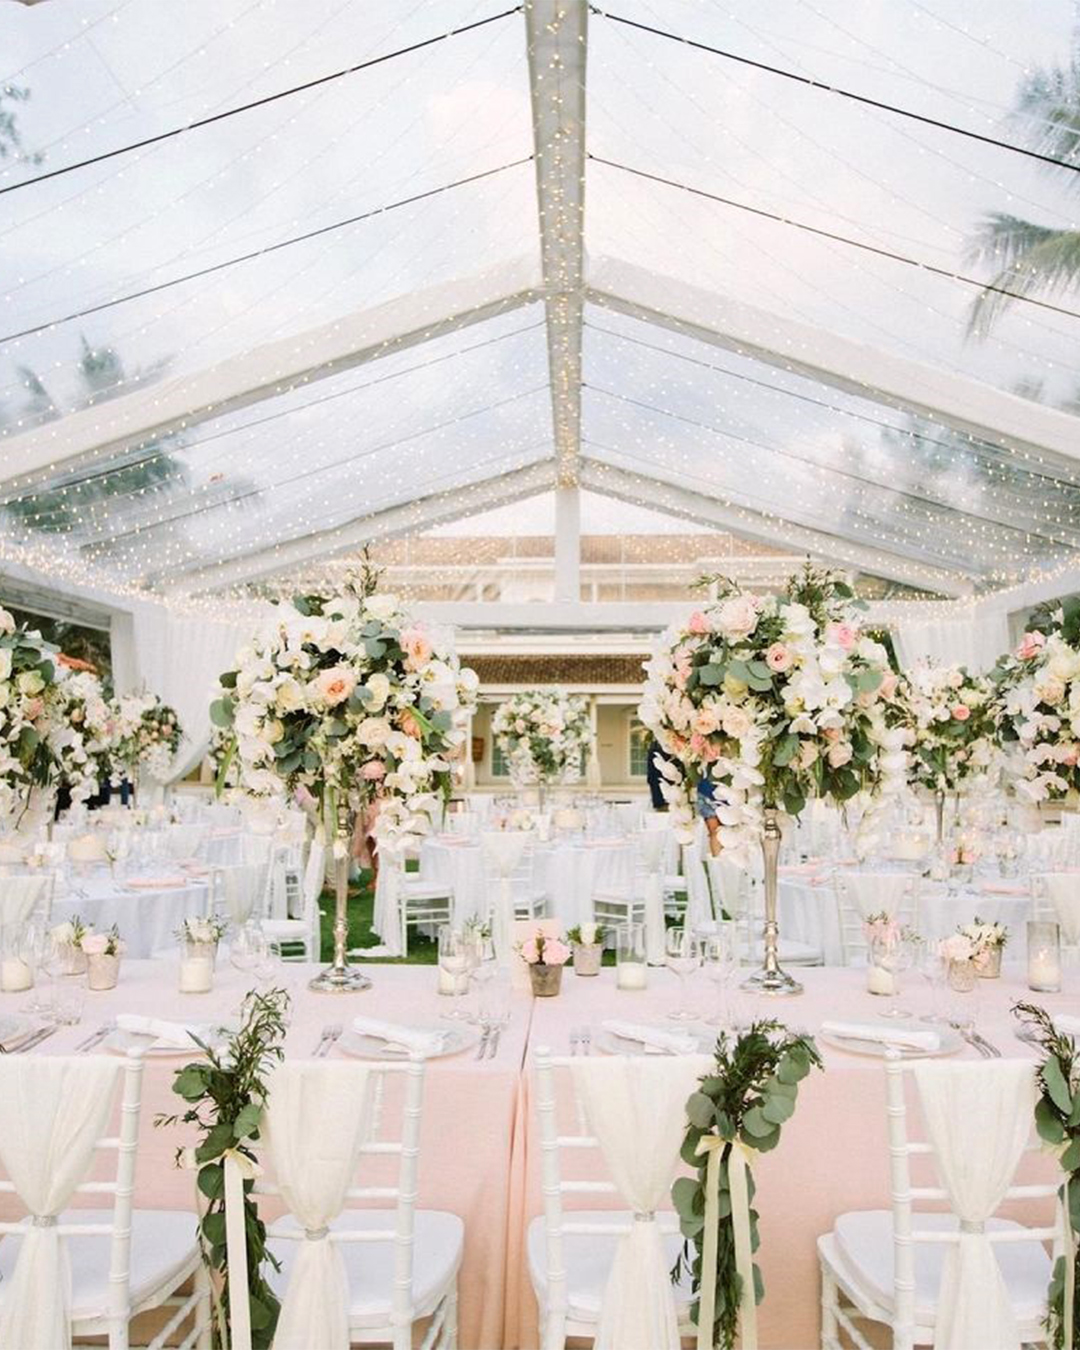 wedding tent ideas for lighting under the tent